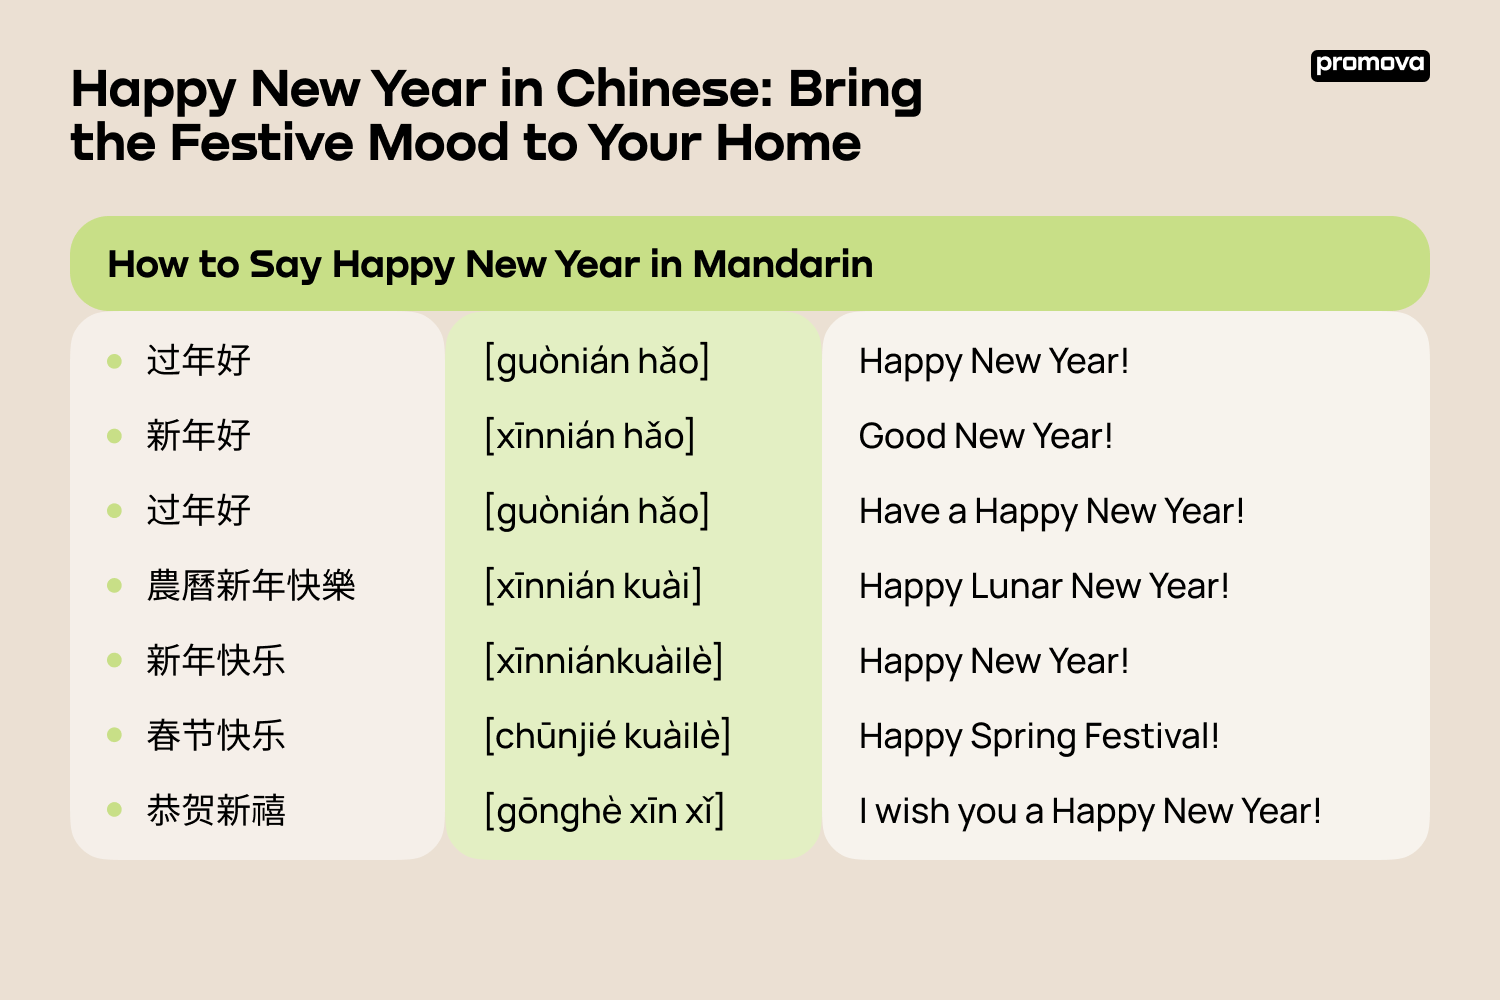 How to Say Happy New Year in Mandarin